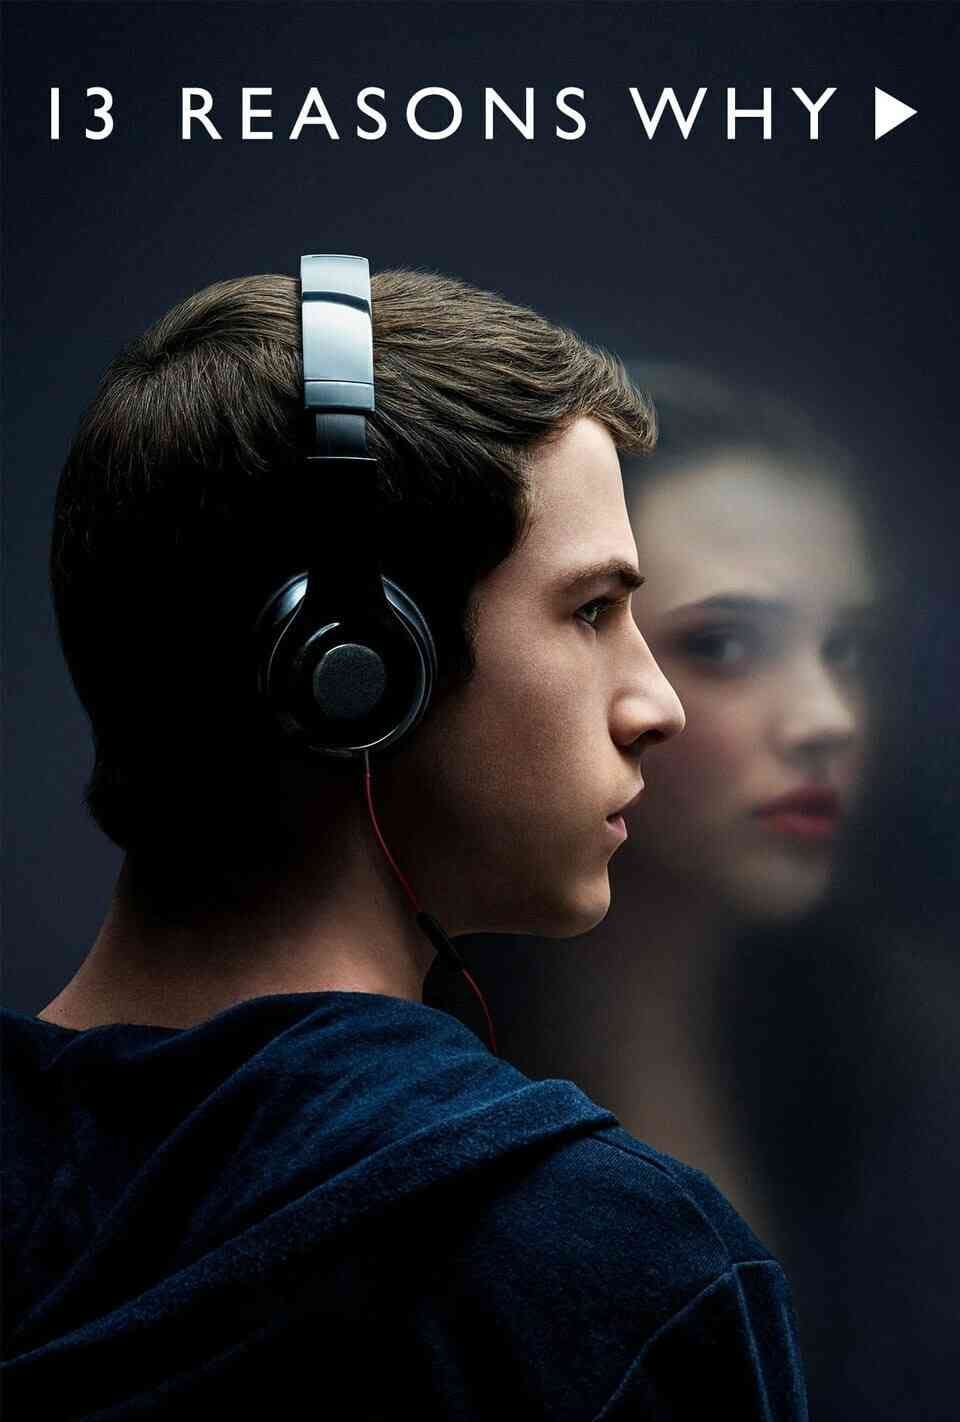 Read 13 Reasons Why screenplay (poster)